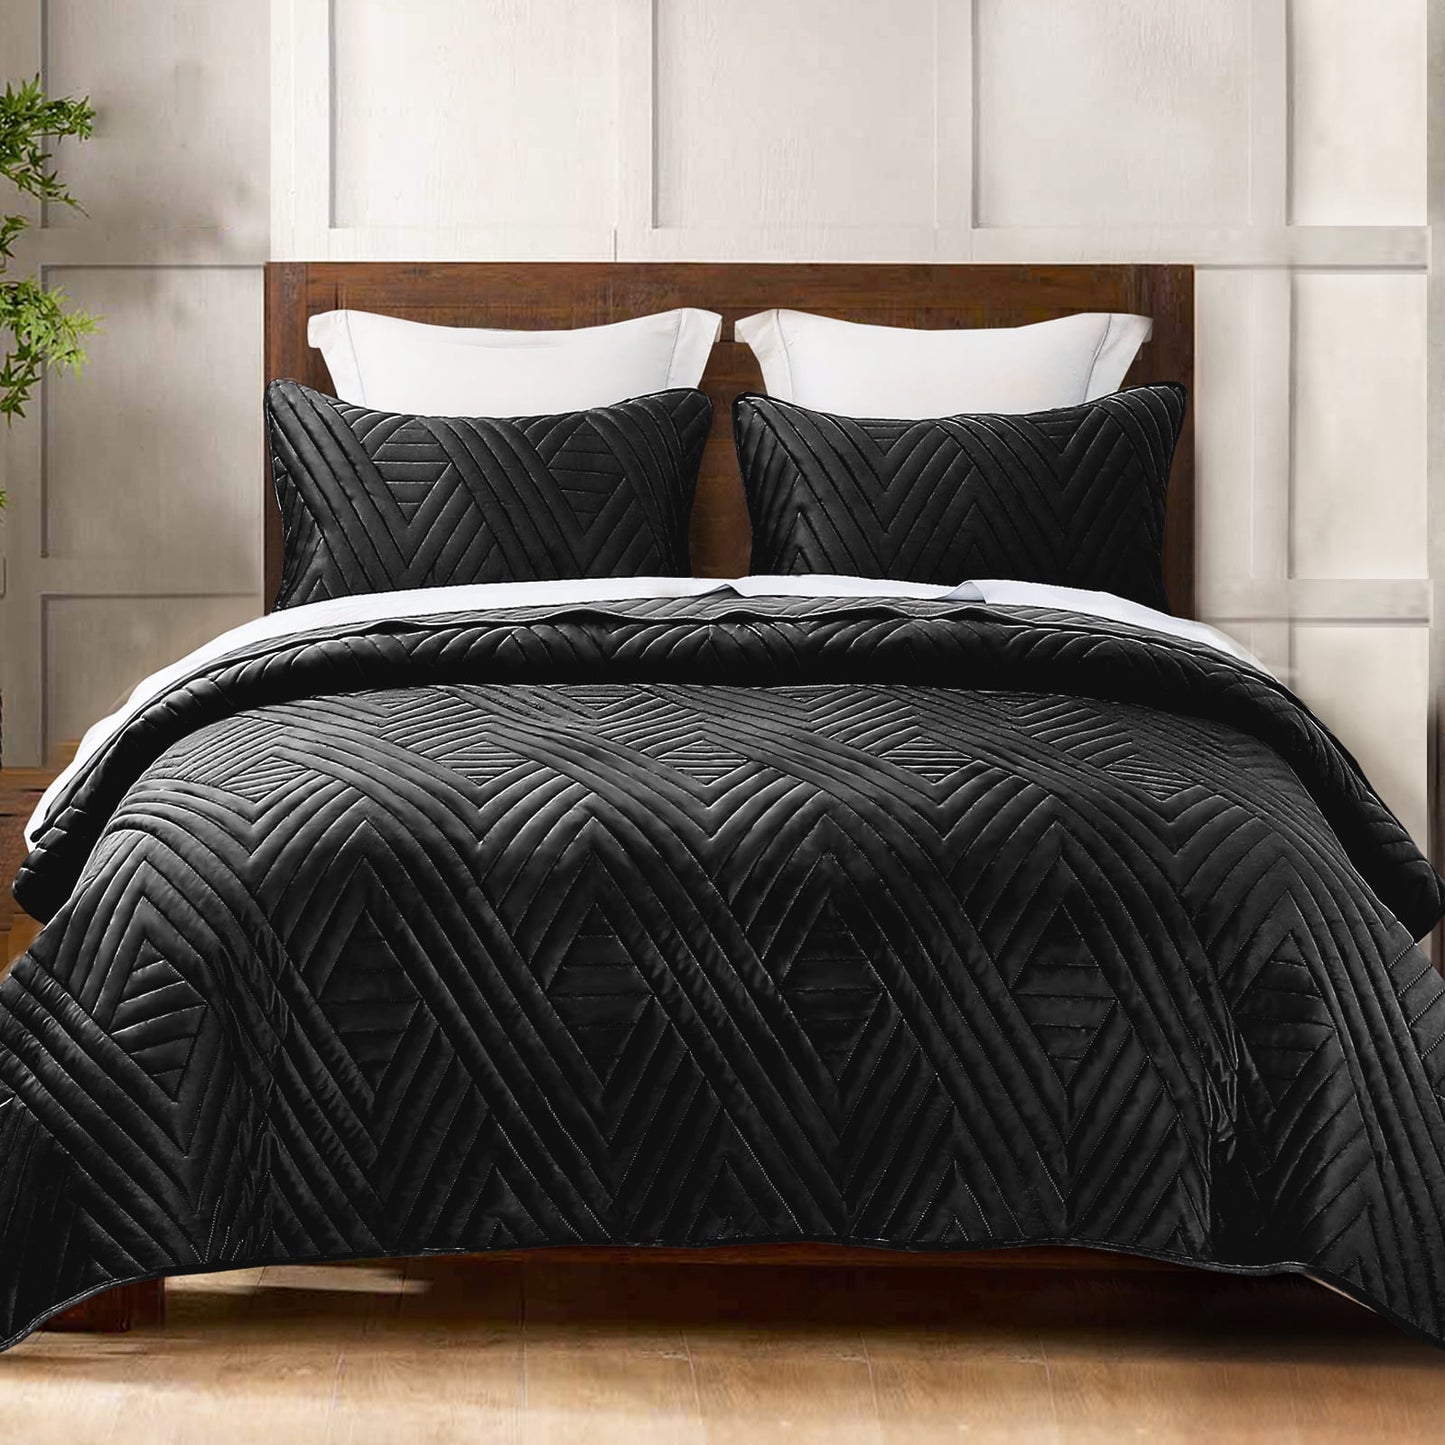 Exclusivo Mezcla Super Plush Velvet Quilt King Size with Pillow Shams, Luxury Soft Reversible 3 Piece Bedspreads Coverlet Comforter set for all seasons, Lightweight and Warm, Black